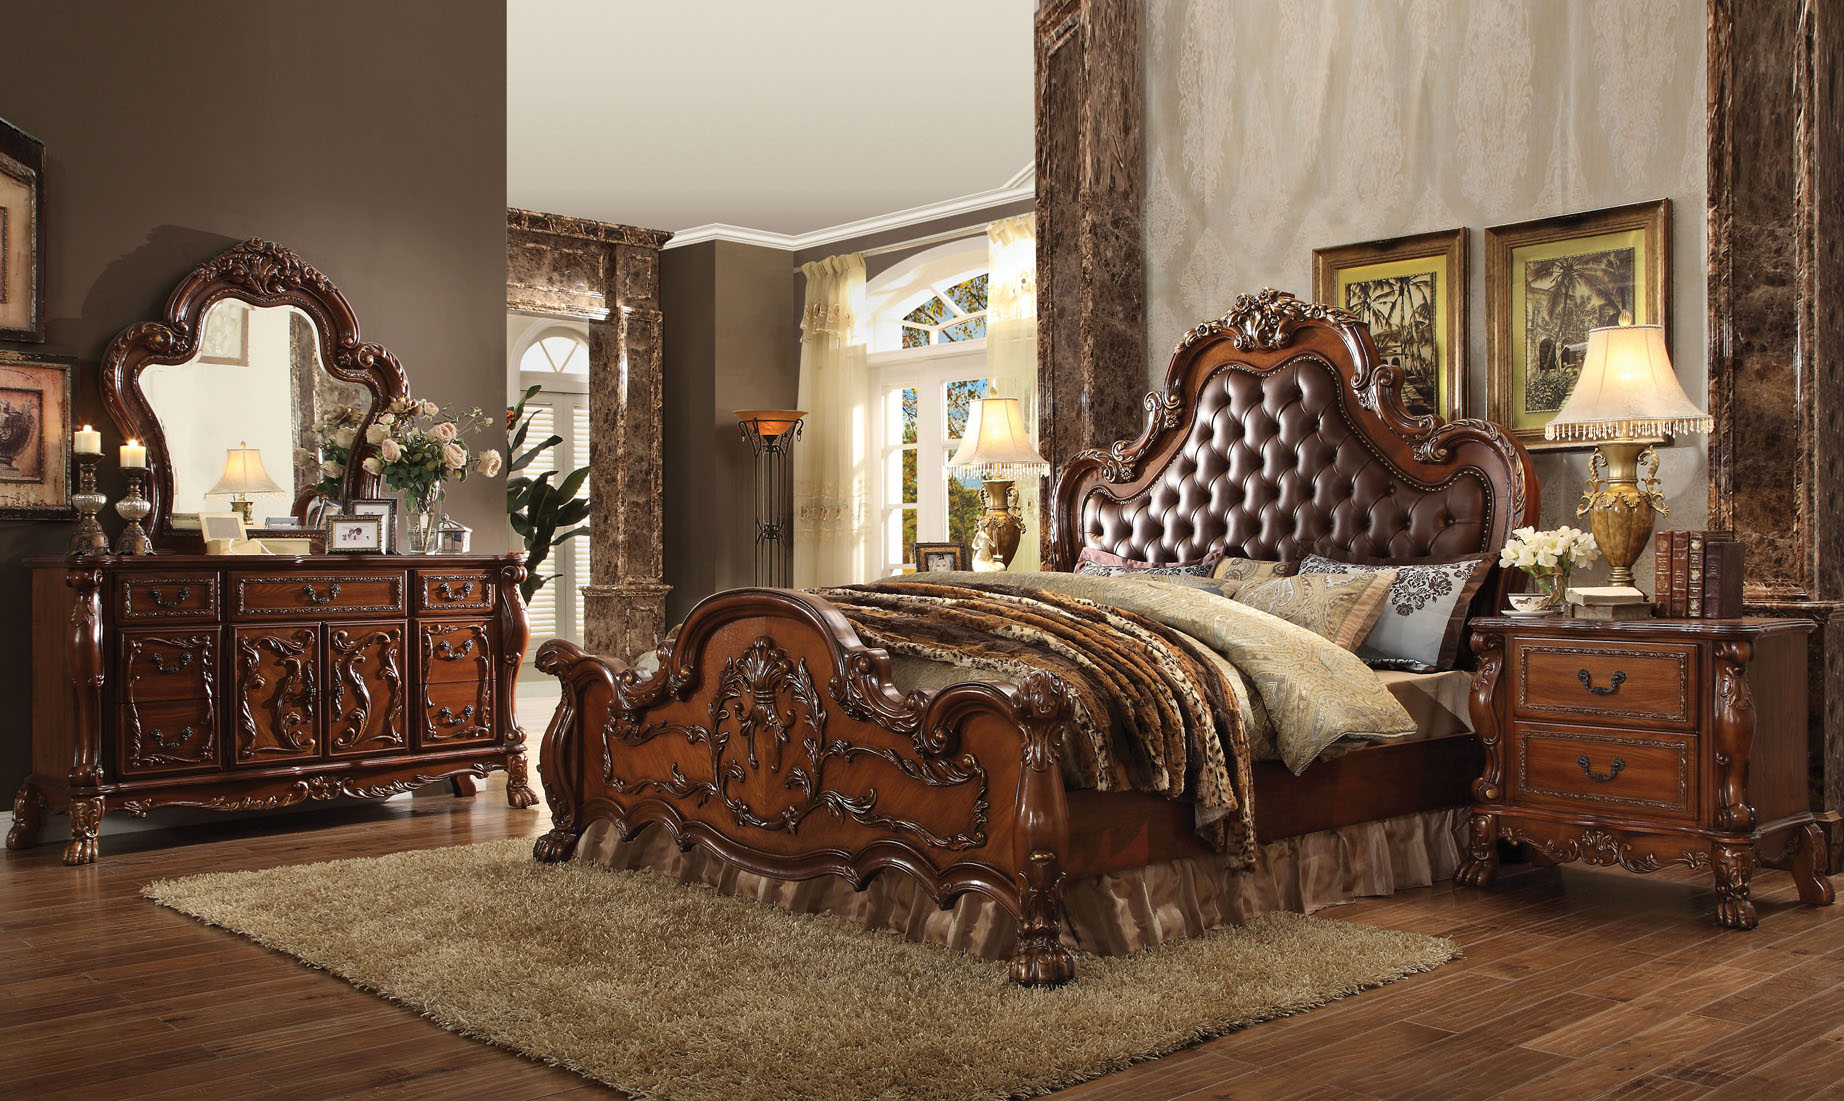 Pc Acme Dresden Tufted Bedroom Set In Cherry Finish